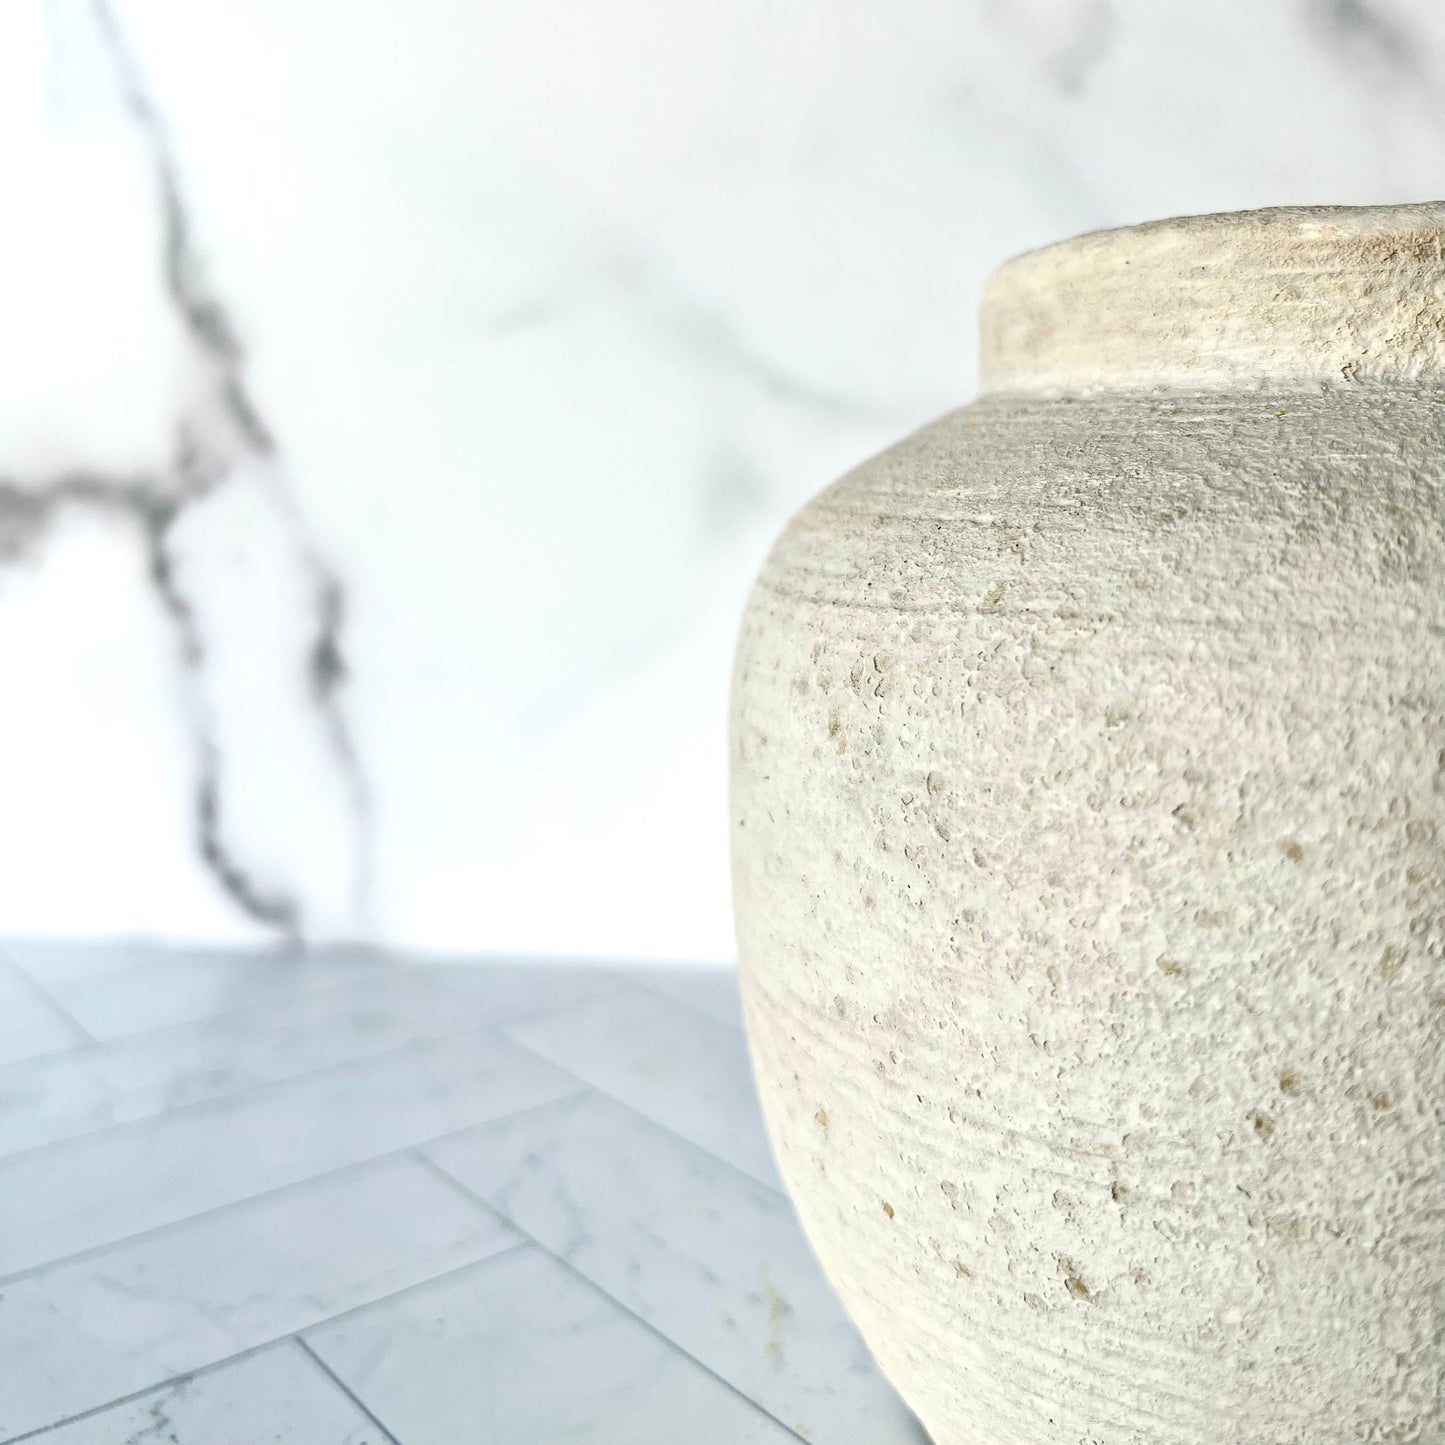 A close up of the right side of the Petite Concrete Vase showing its texture, striations running horizontally around it